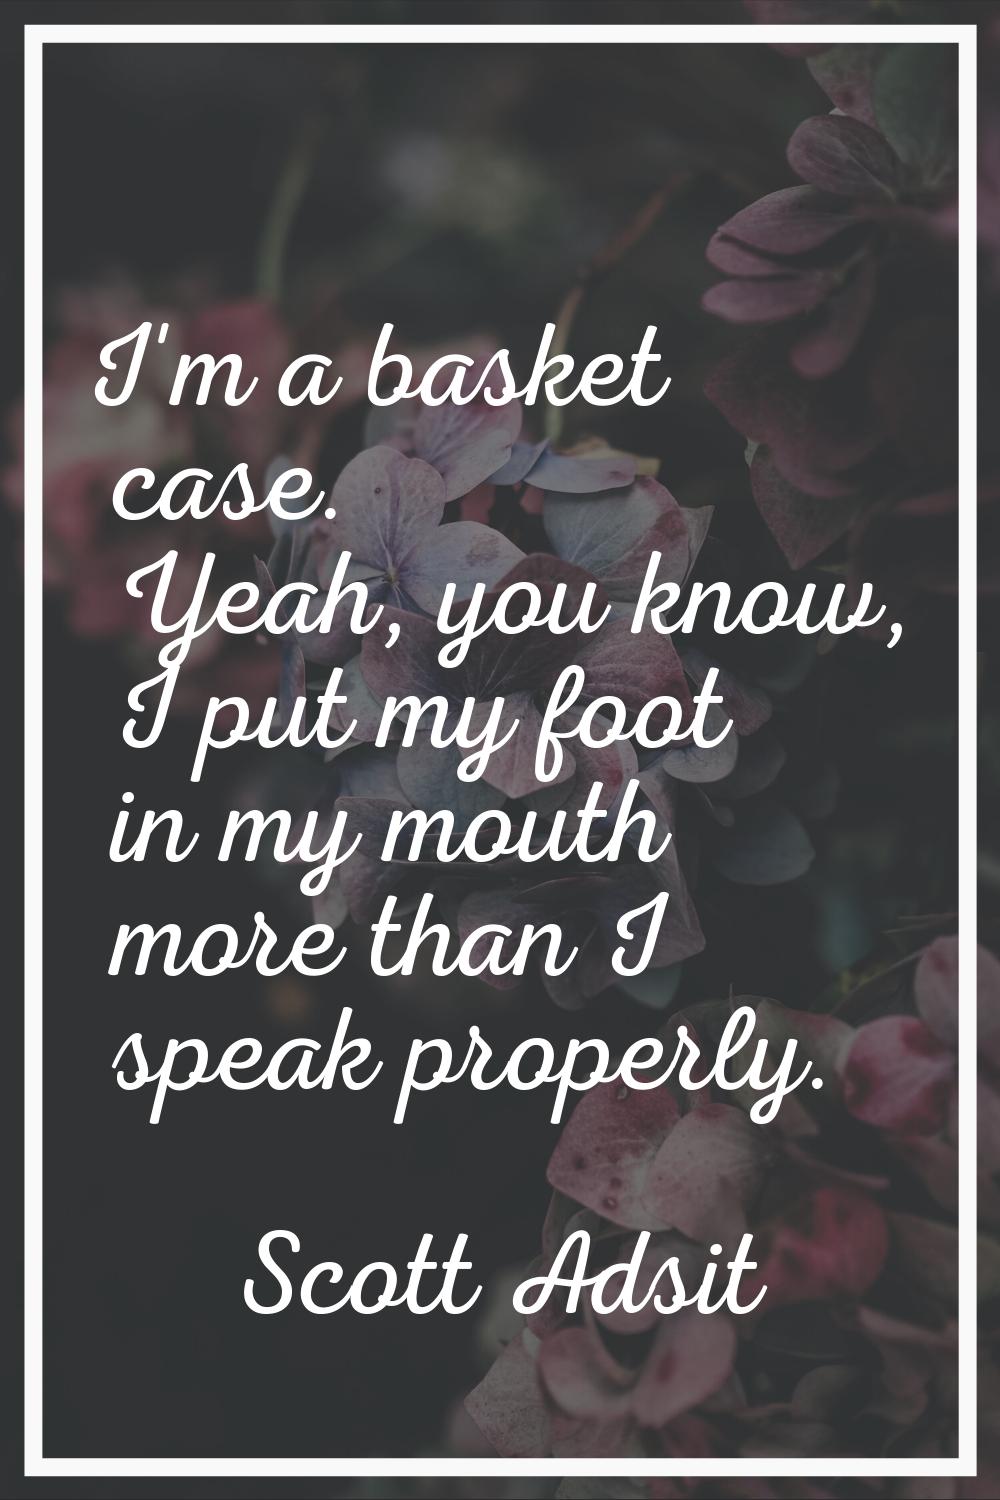 I'm a basket case. Yeah, you know, I put my foot in my mouth more than I speak properly.